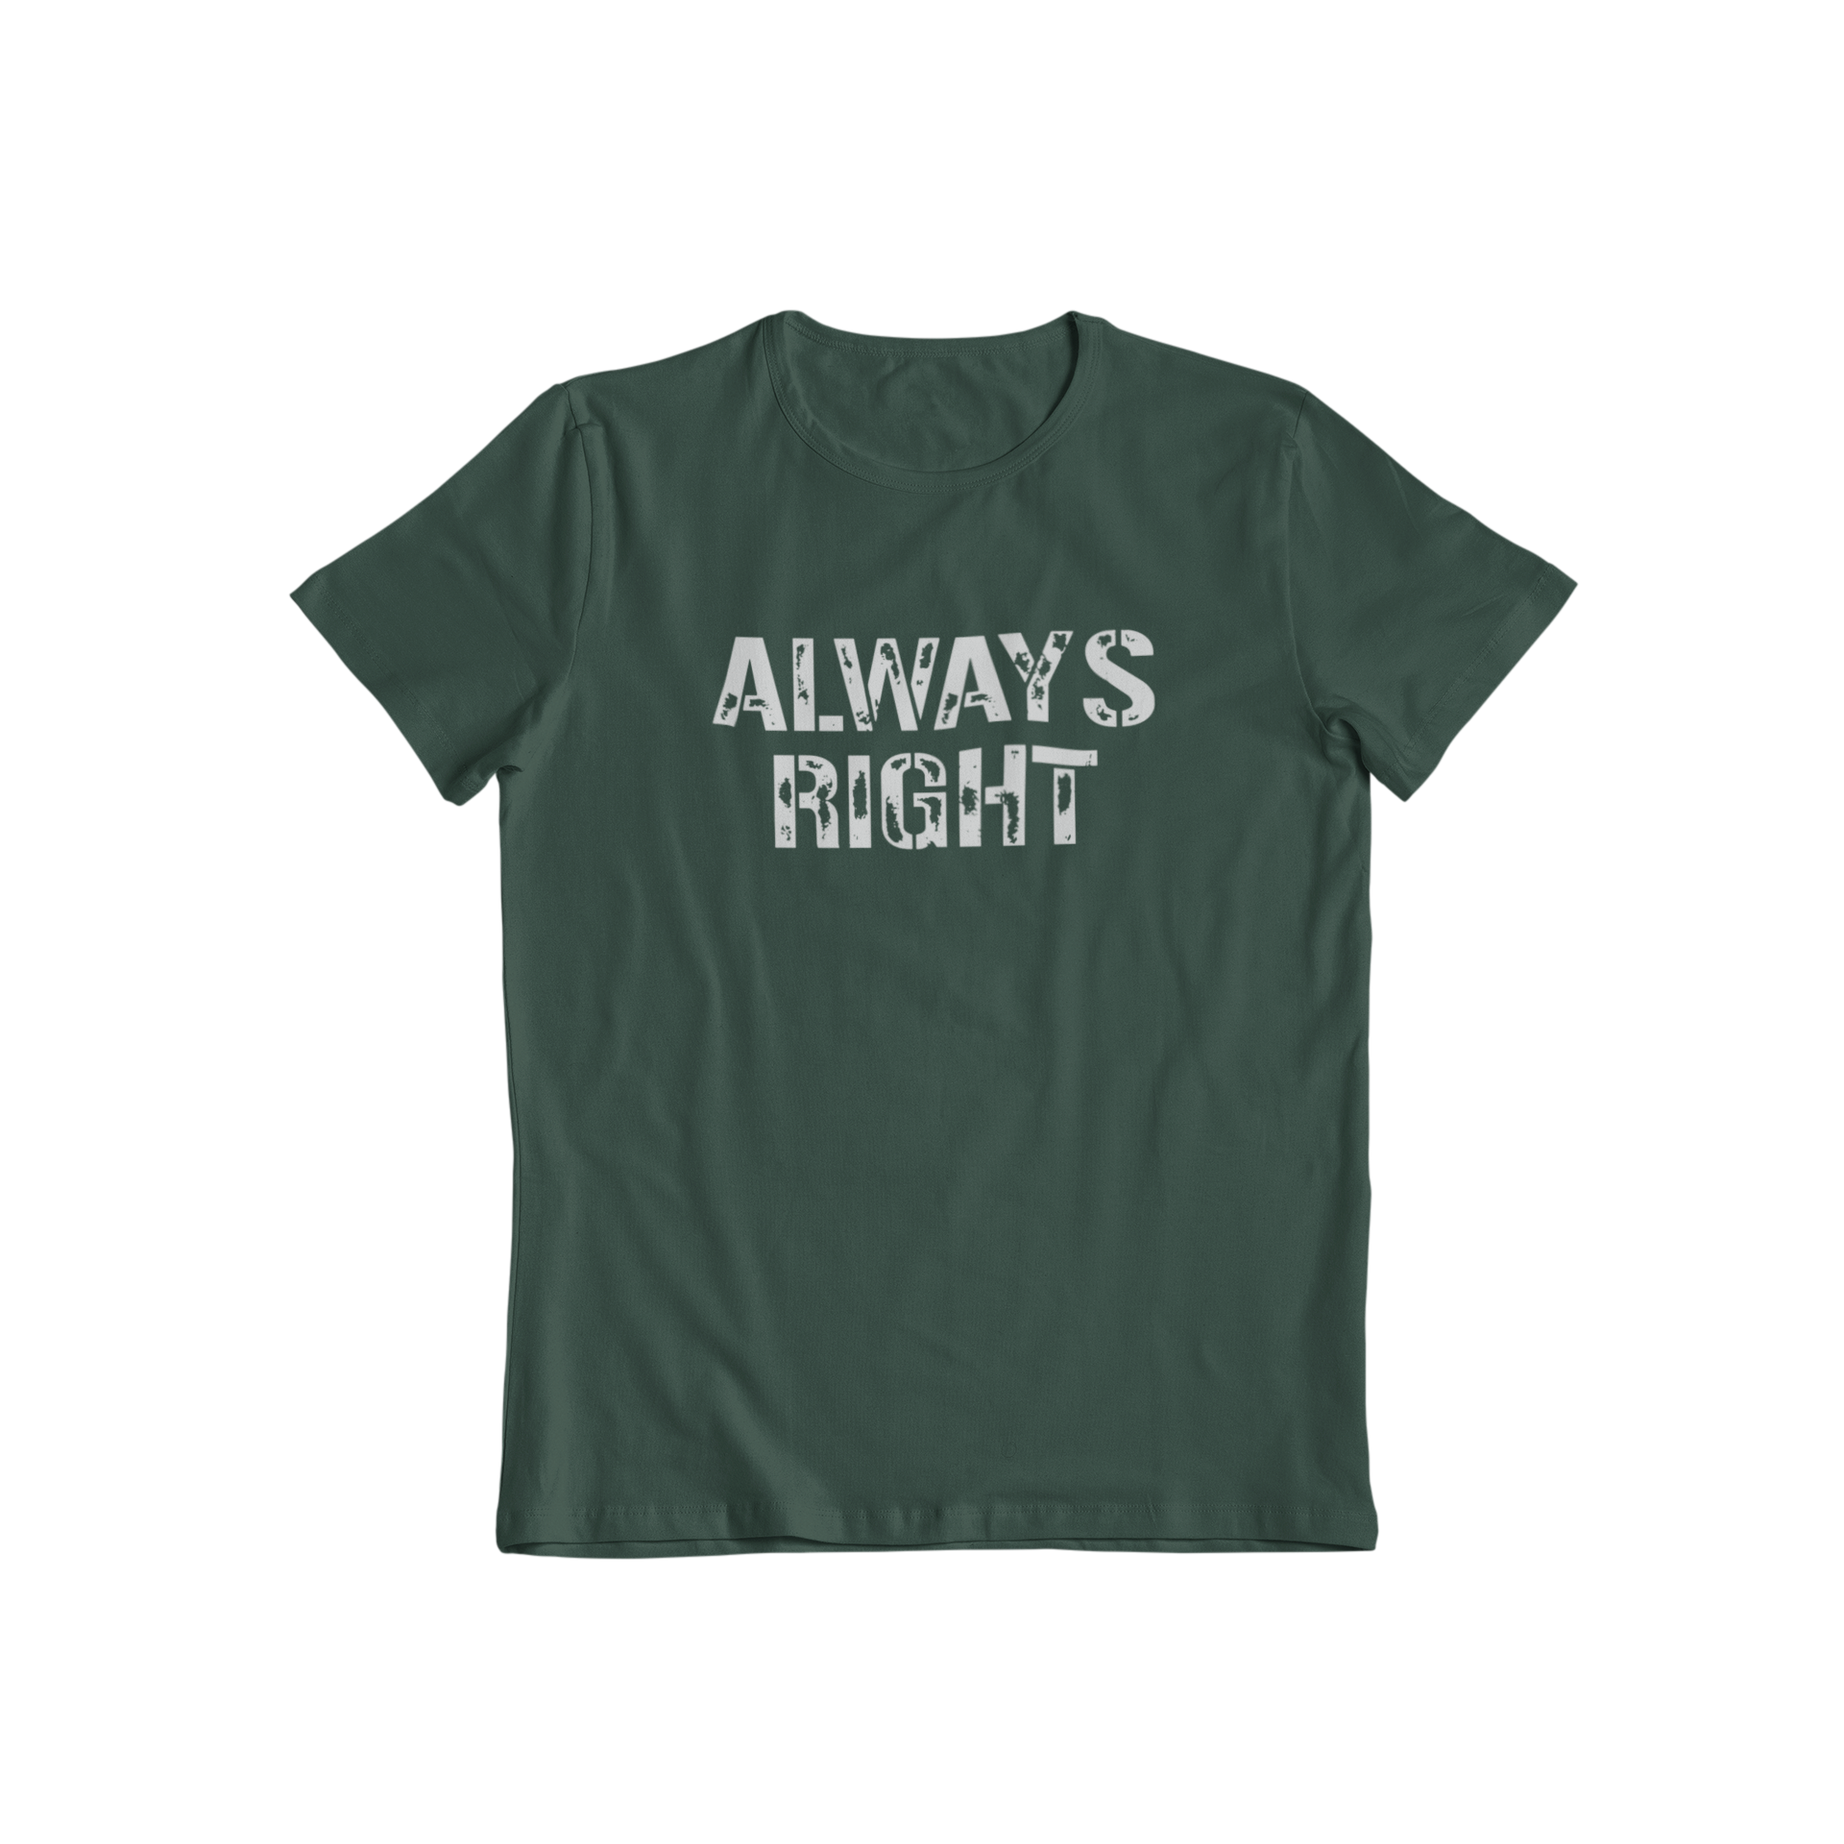 Experience unbeatable style and humor with our Always Right T-shirt. This matching slogan tee is the perfect addition to your wardrobe, and pairs perfectly with our Always Wrong t-shirt. Stay stylish and always on point with this must-have t-shirt.